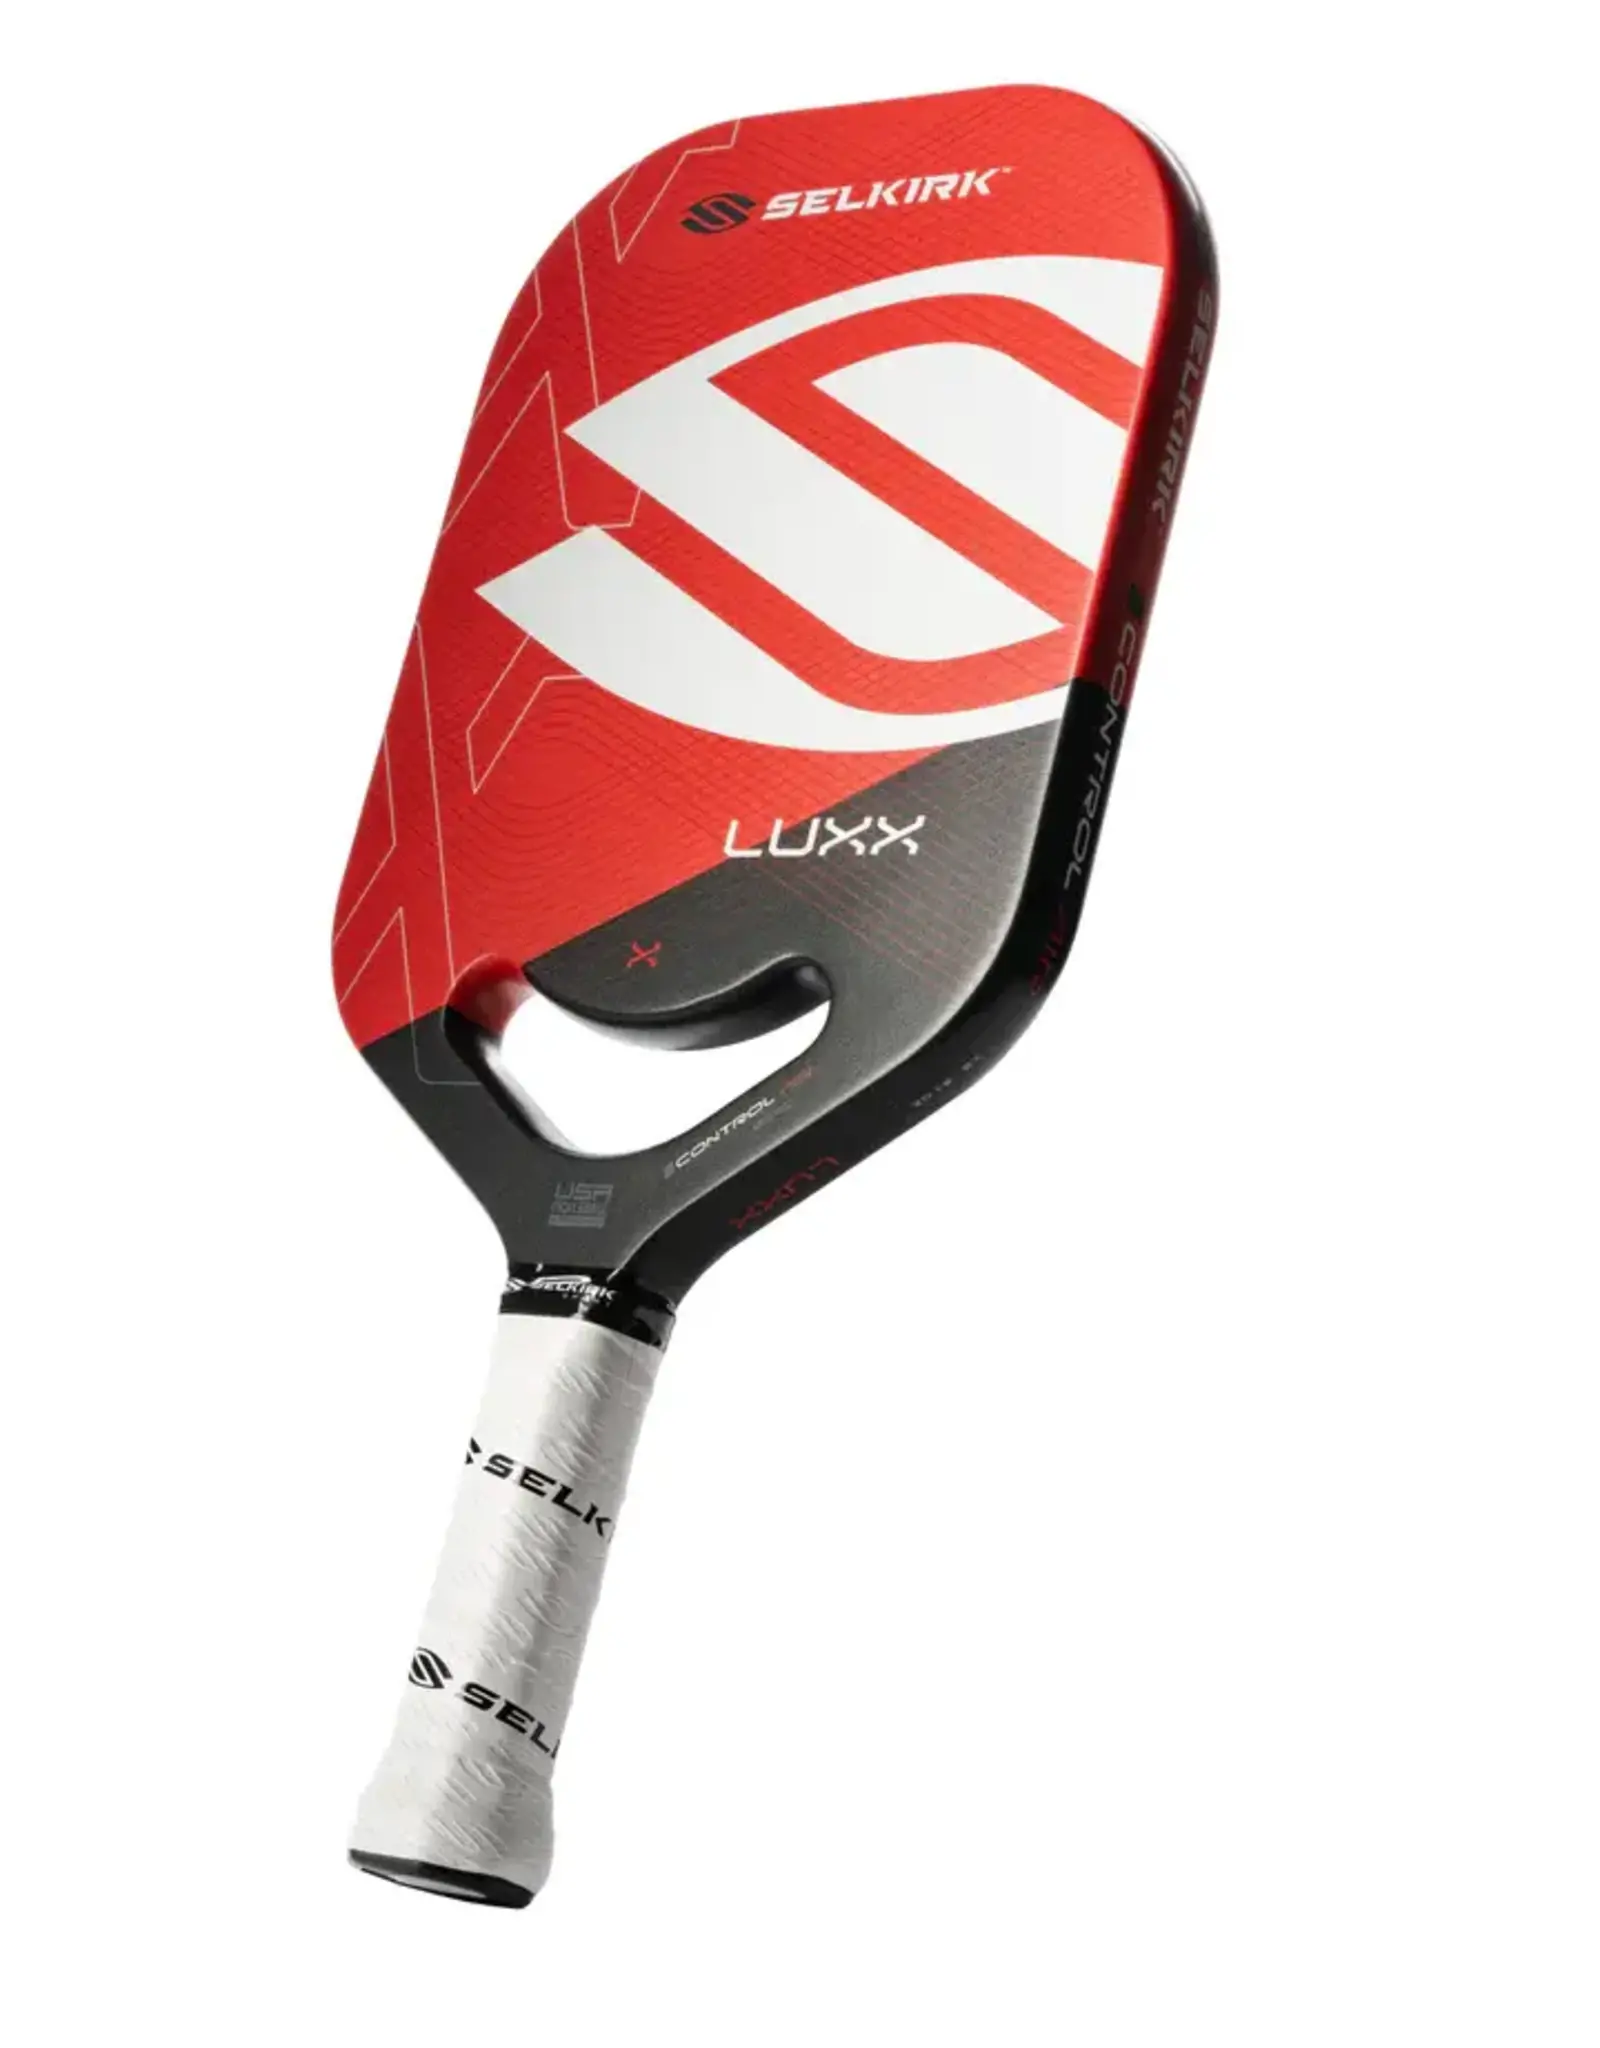 Selkirk Selkirk LUXX Control Air Epic (Red) Pickleball Paddle